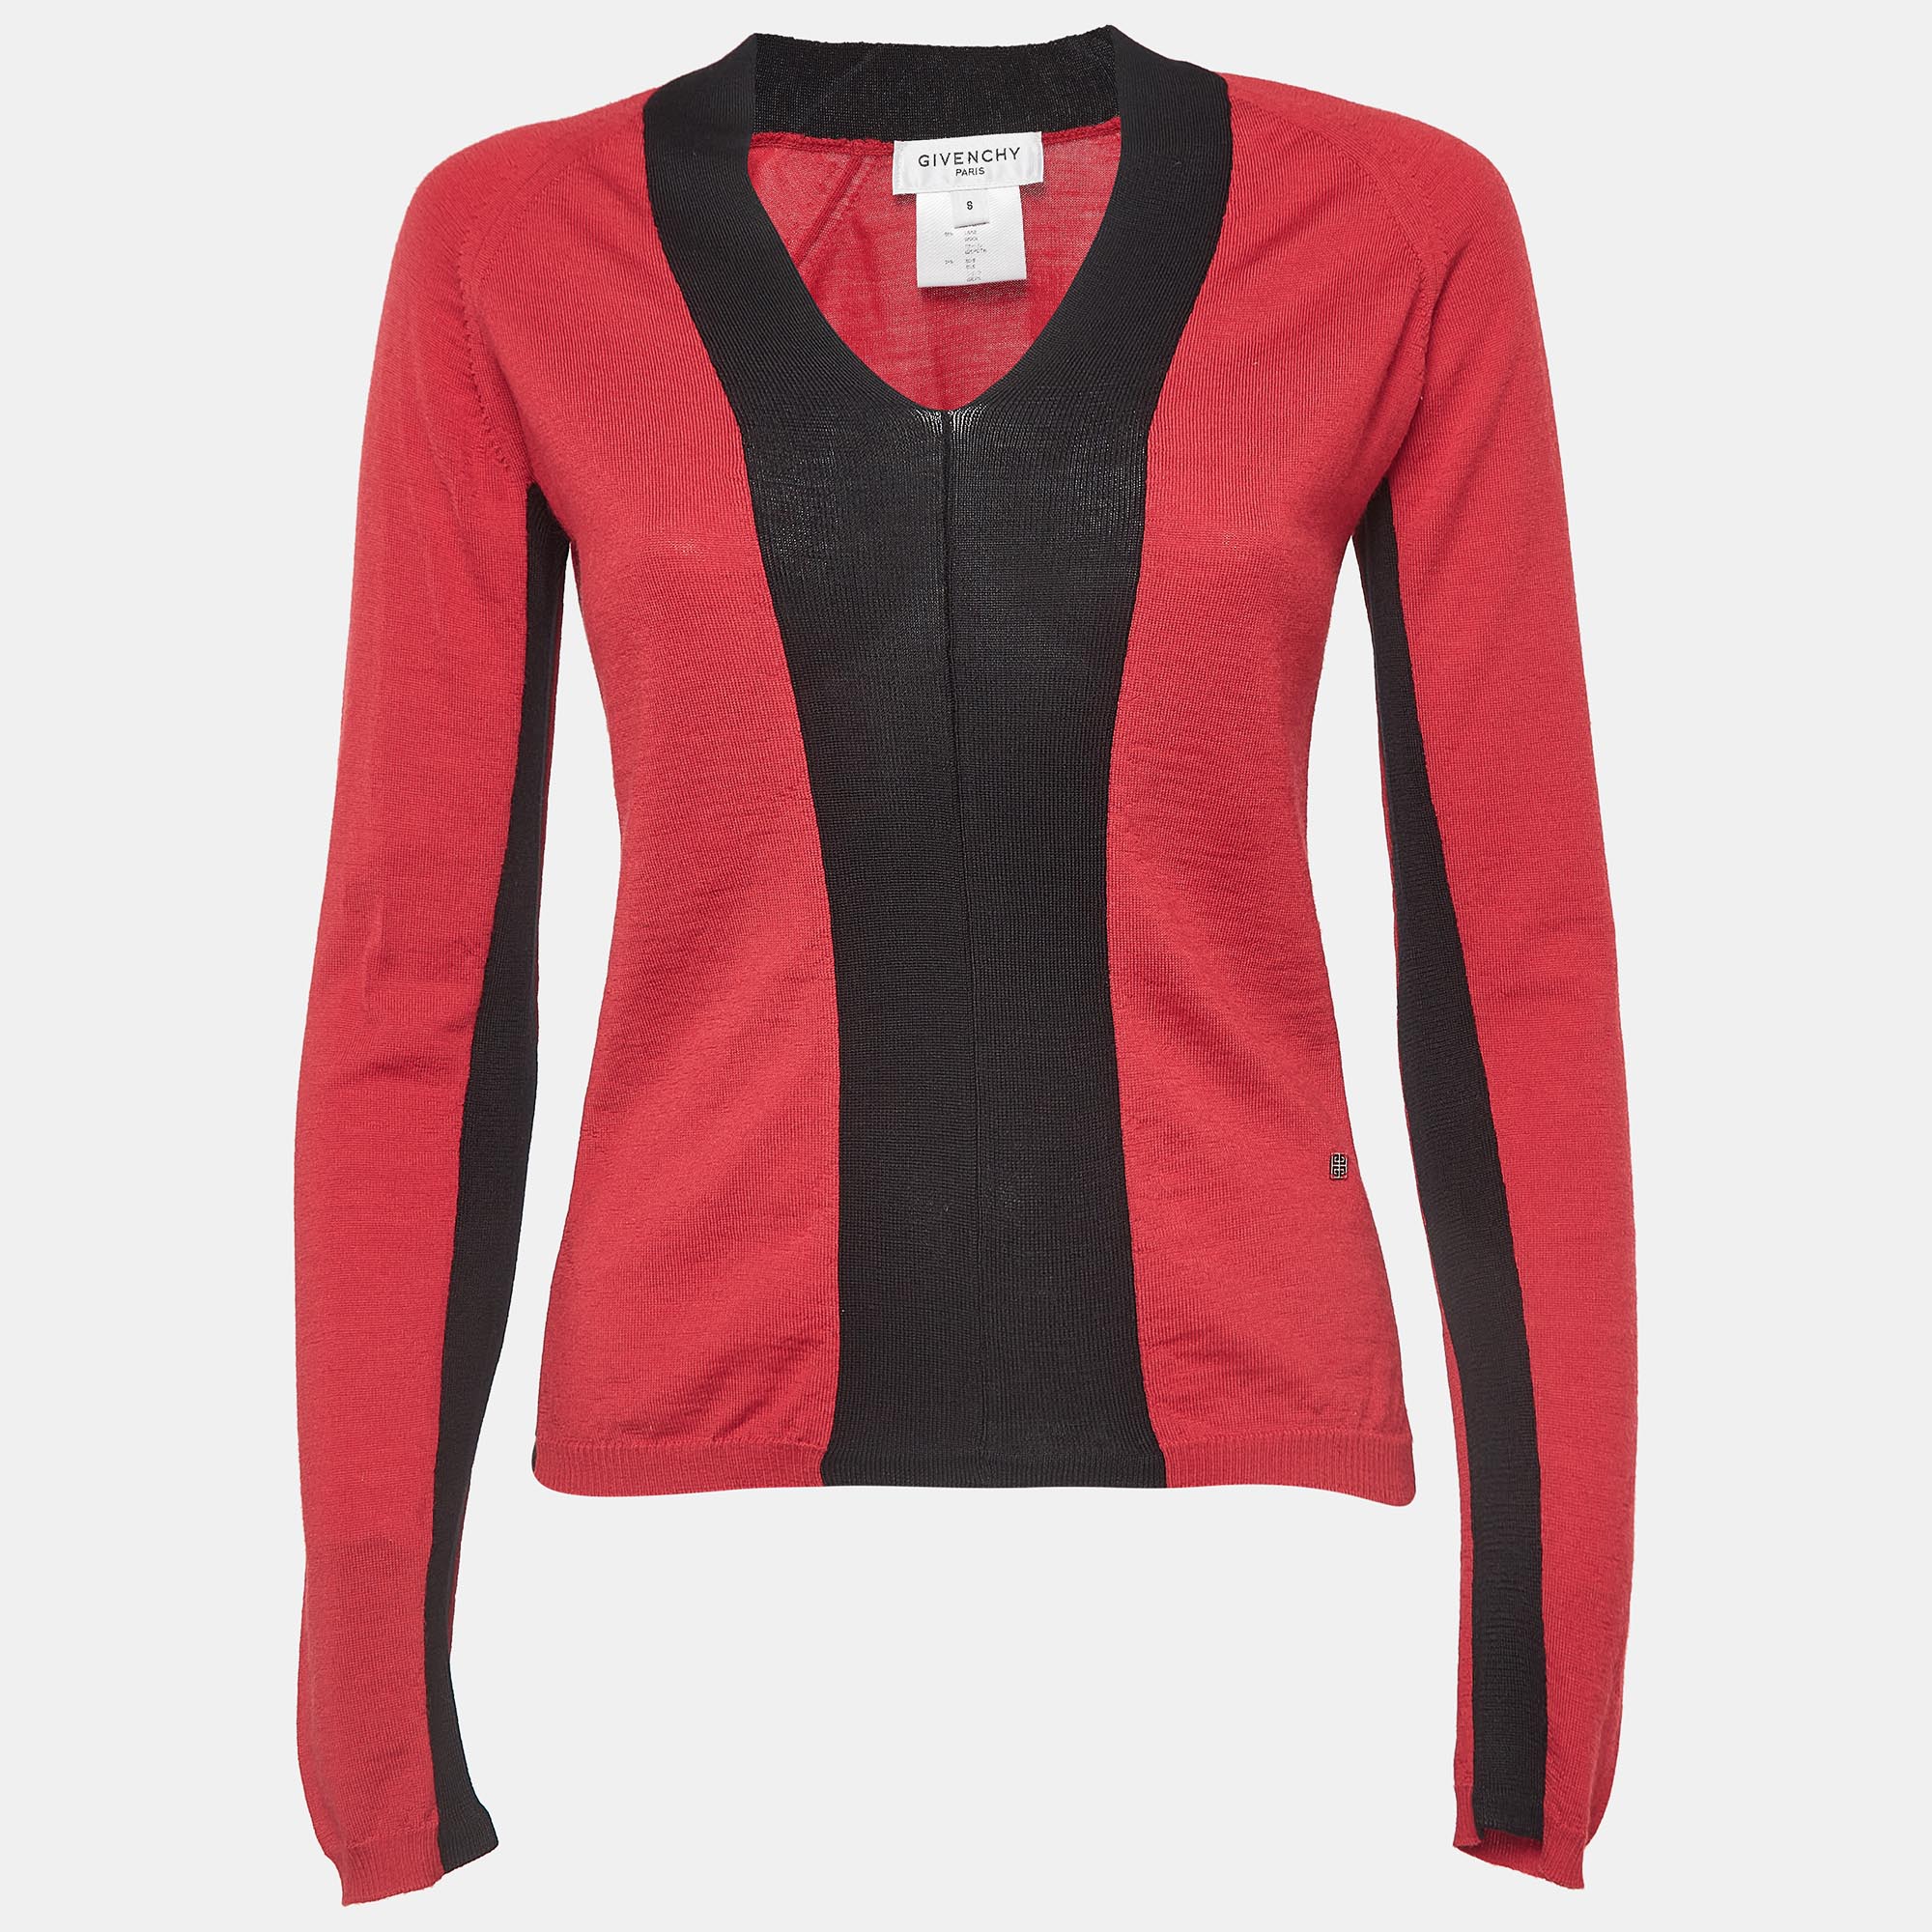 

Givenchy Red/Black Jersey Colorblock Sweatshirt